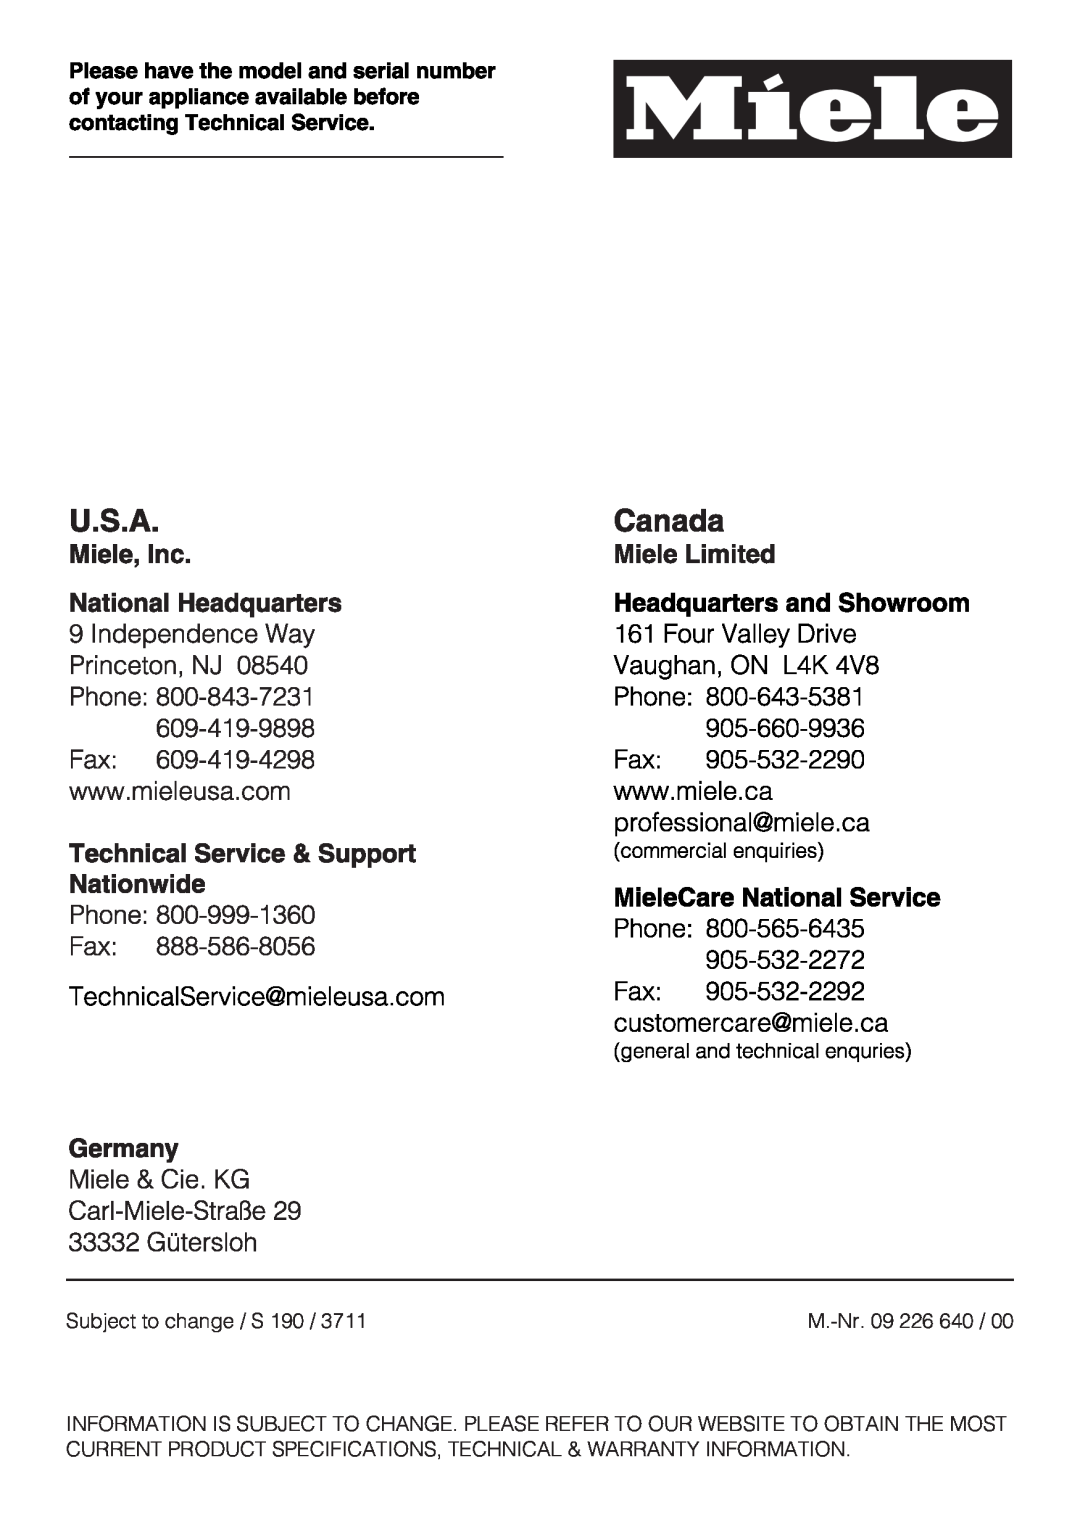 Miele S 190 operating instructions Subject to change / S, M.-Nr.09 226 640 